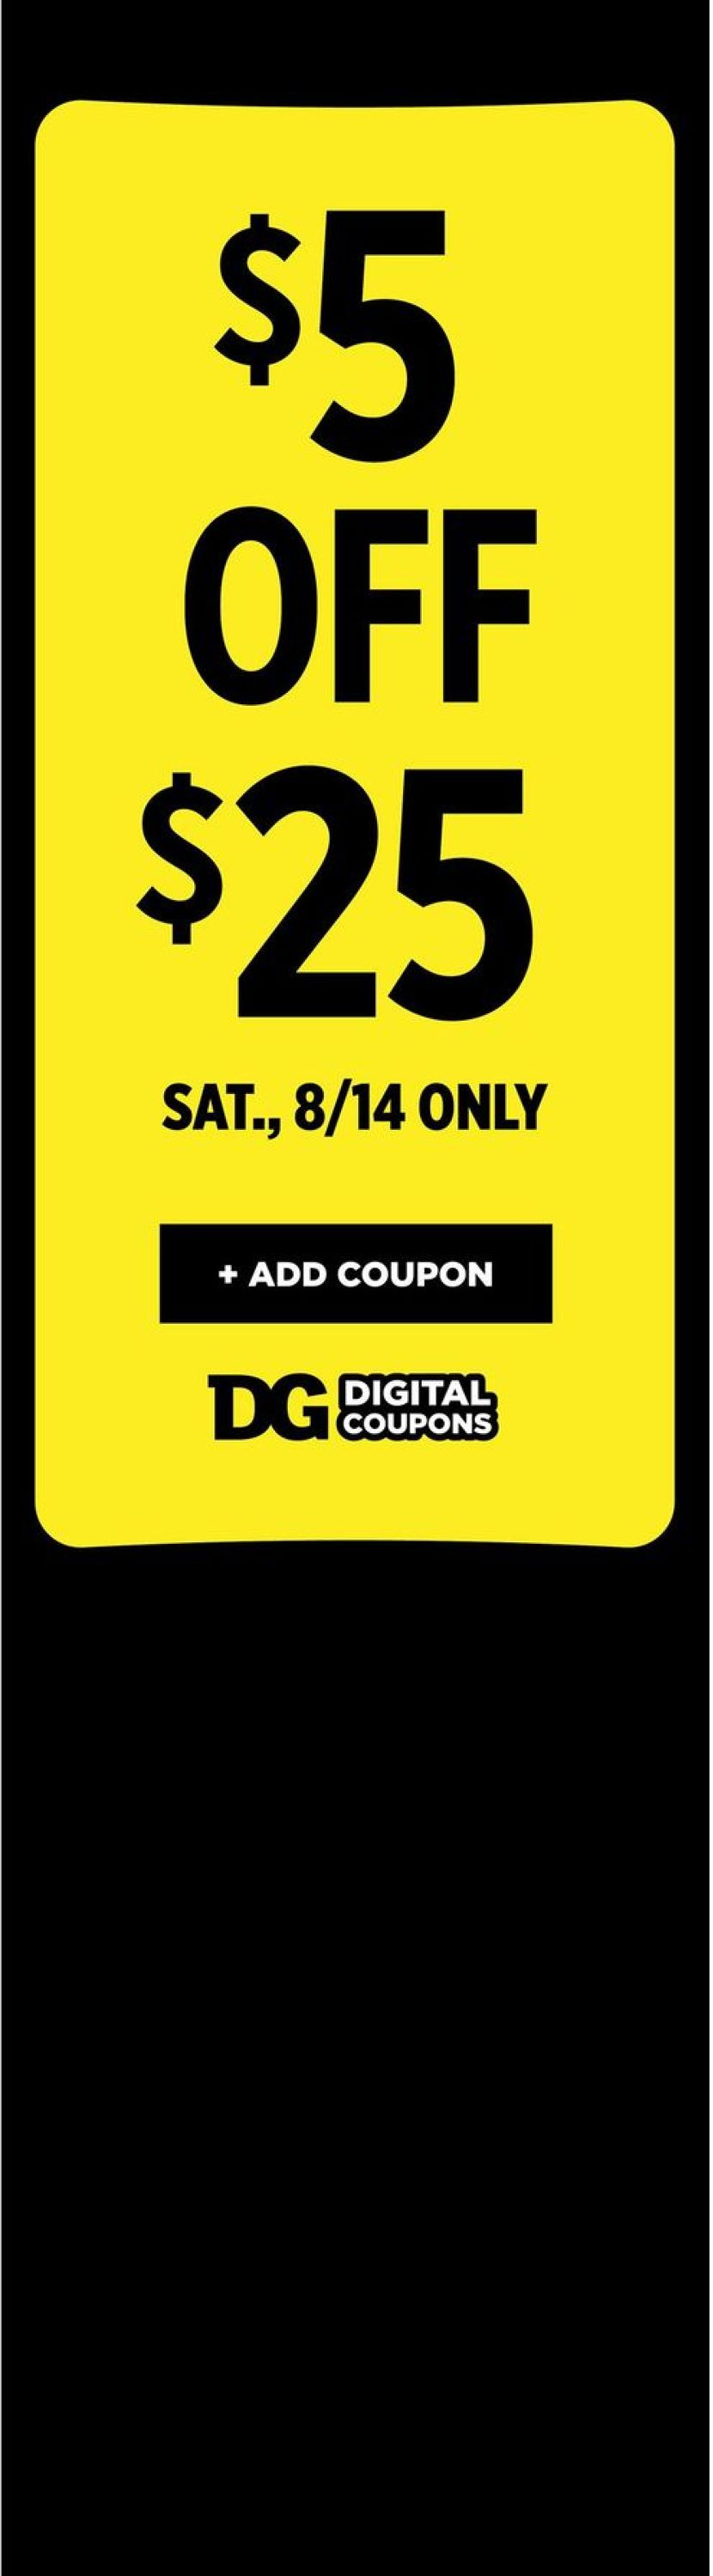 Dollar General Ad from 08/08/2021